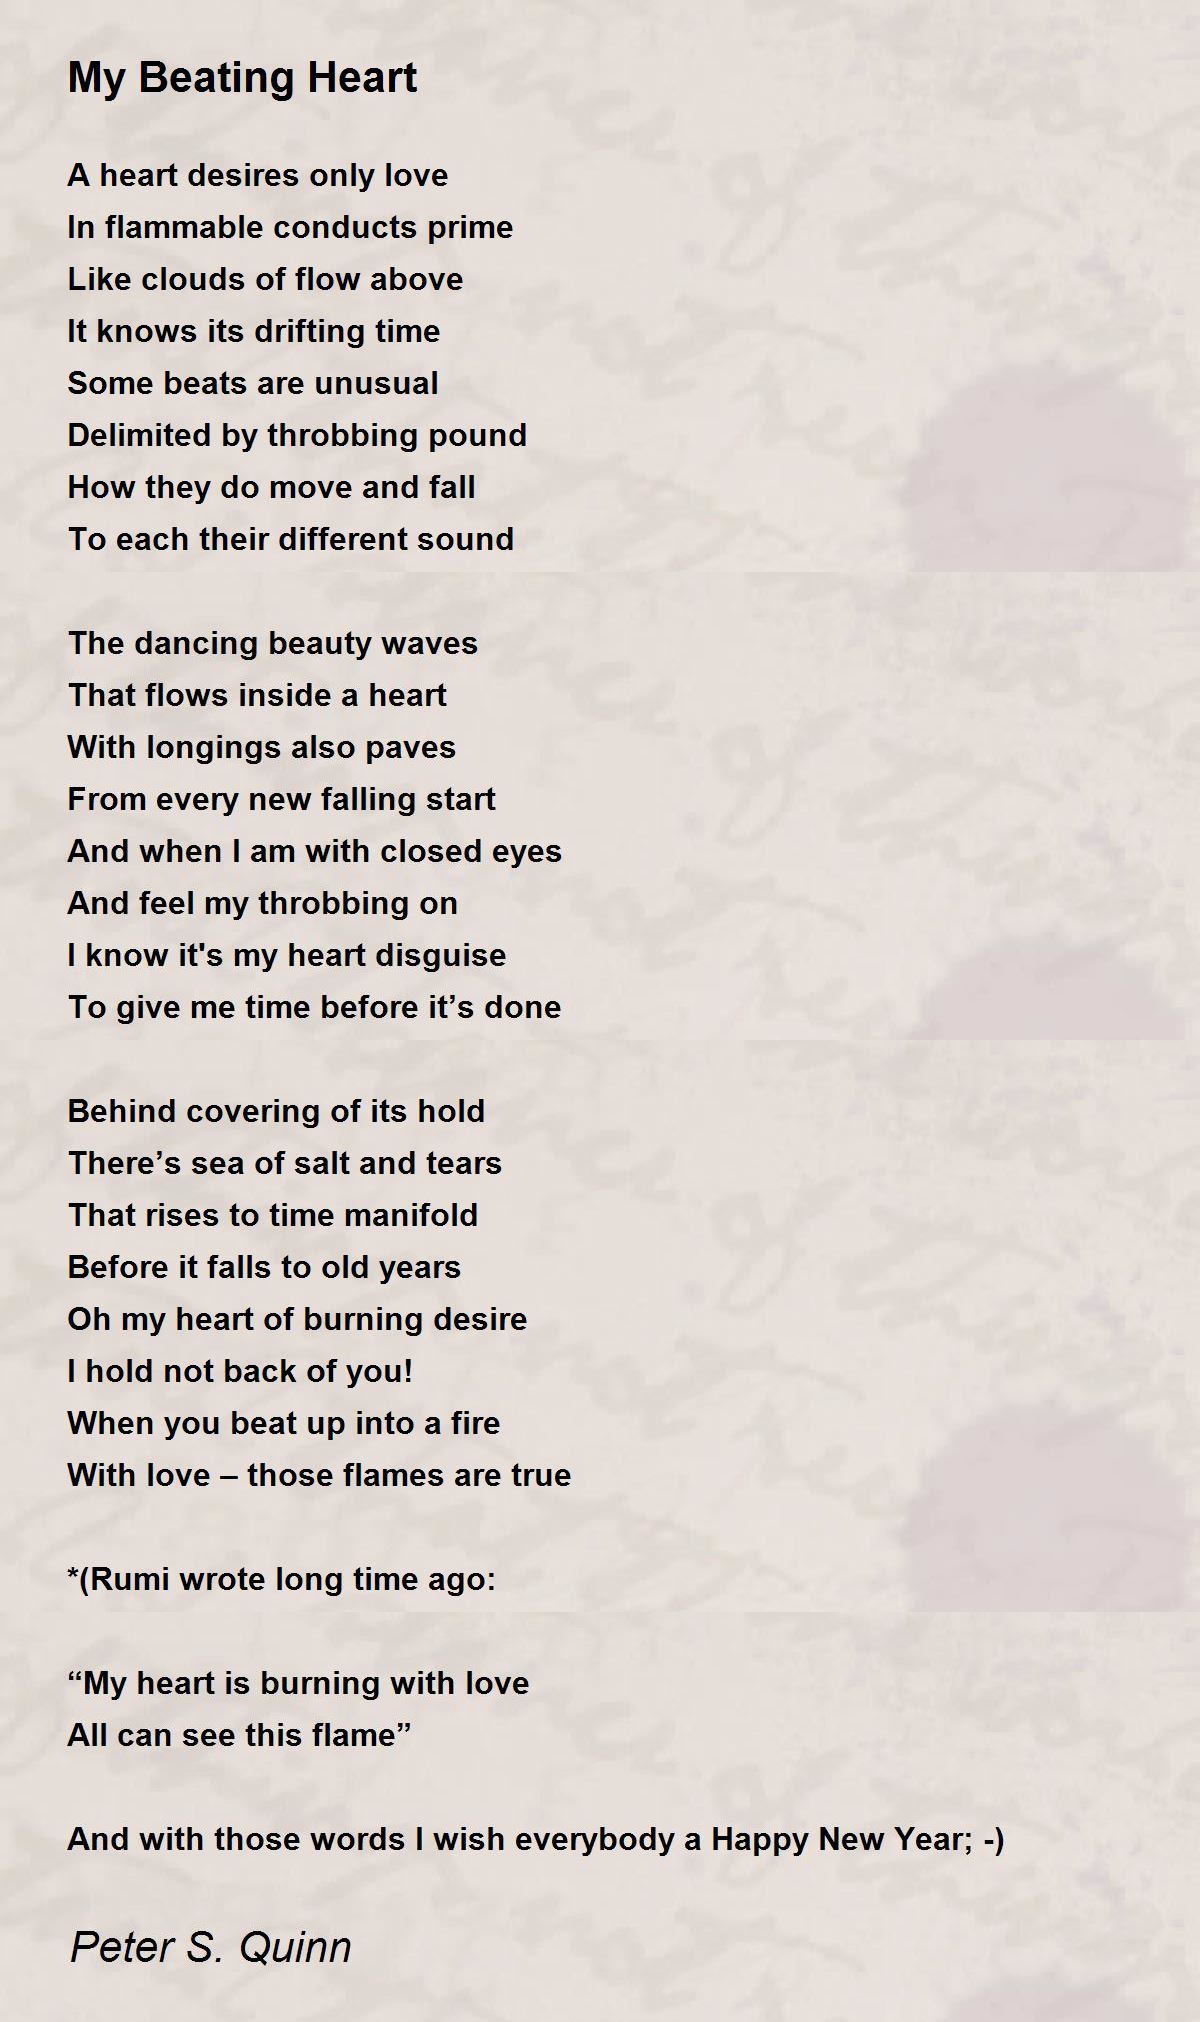 Forstyrre Pudsigt Ung dame My Beating Heart - My Beating Heart Poem by Peter S. Quinn